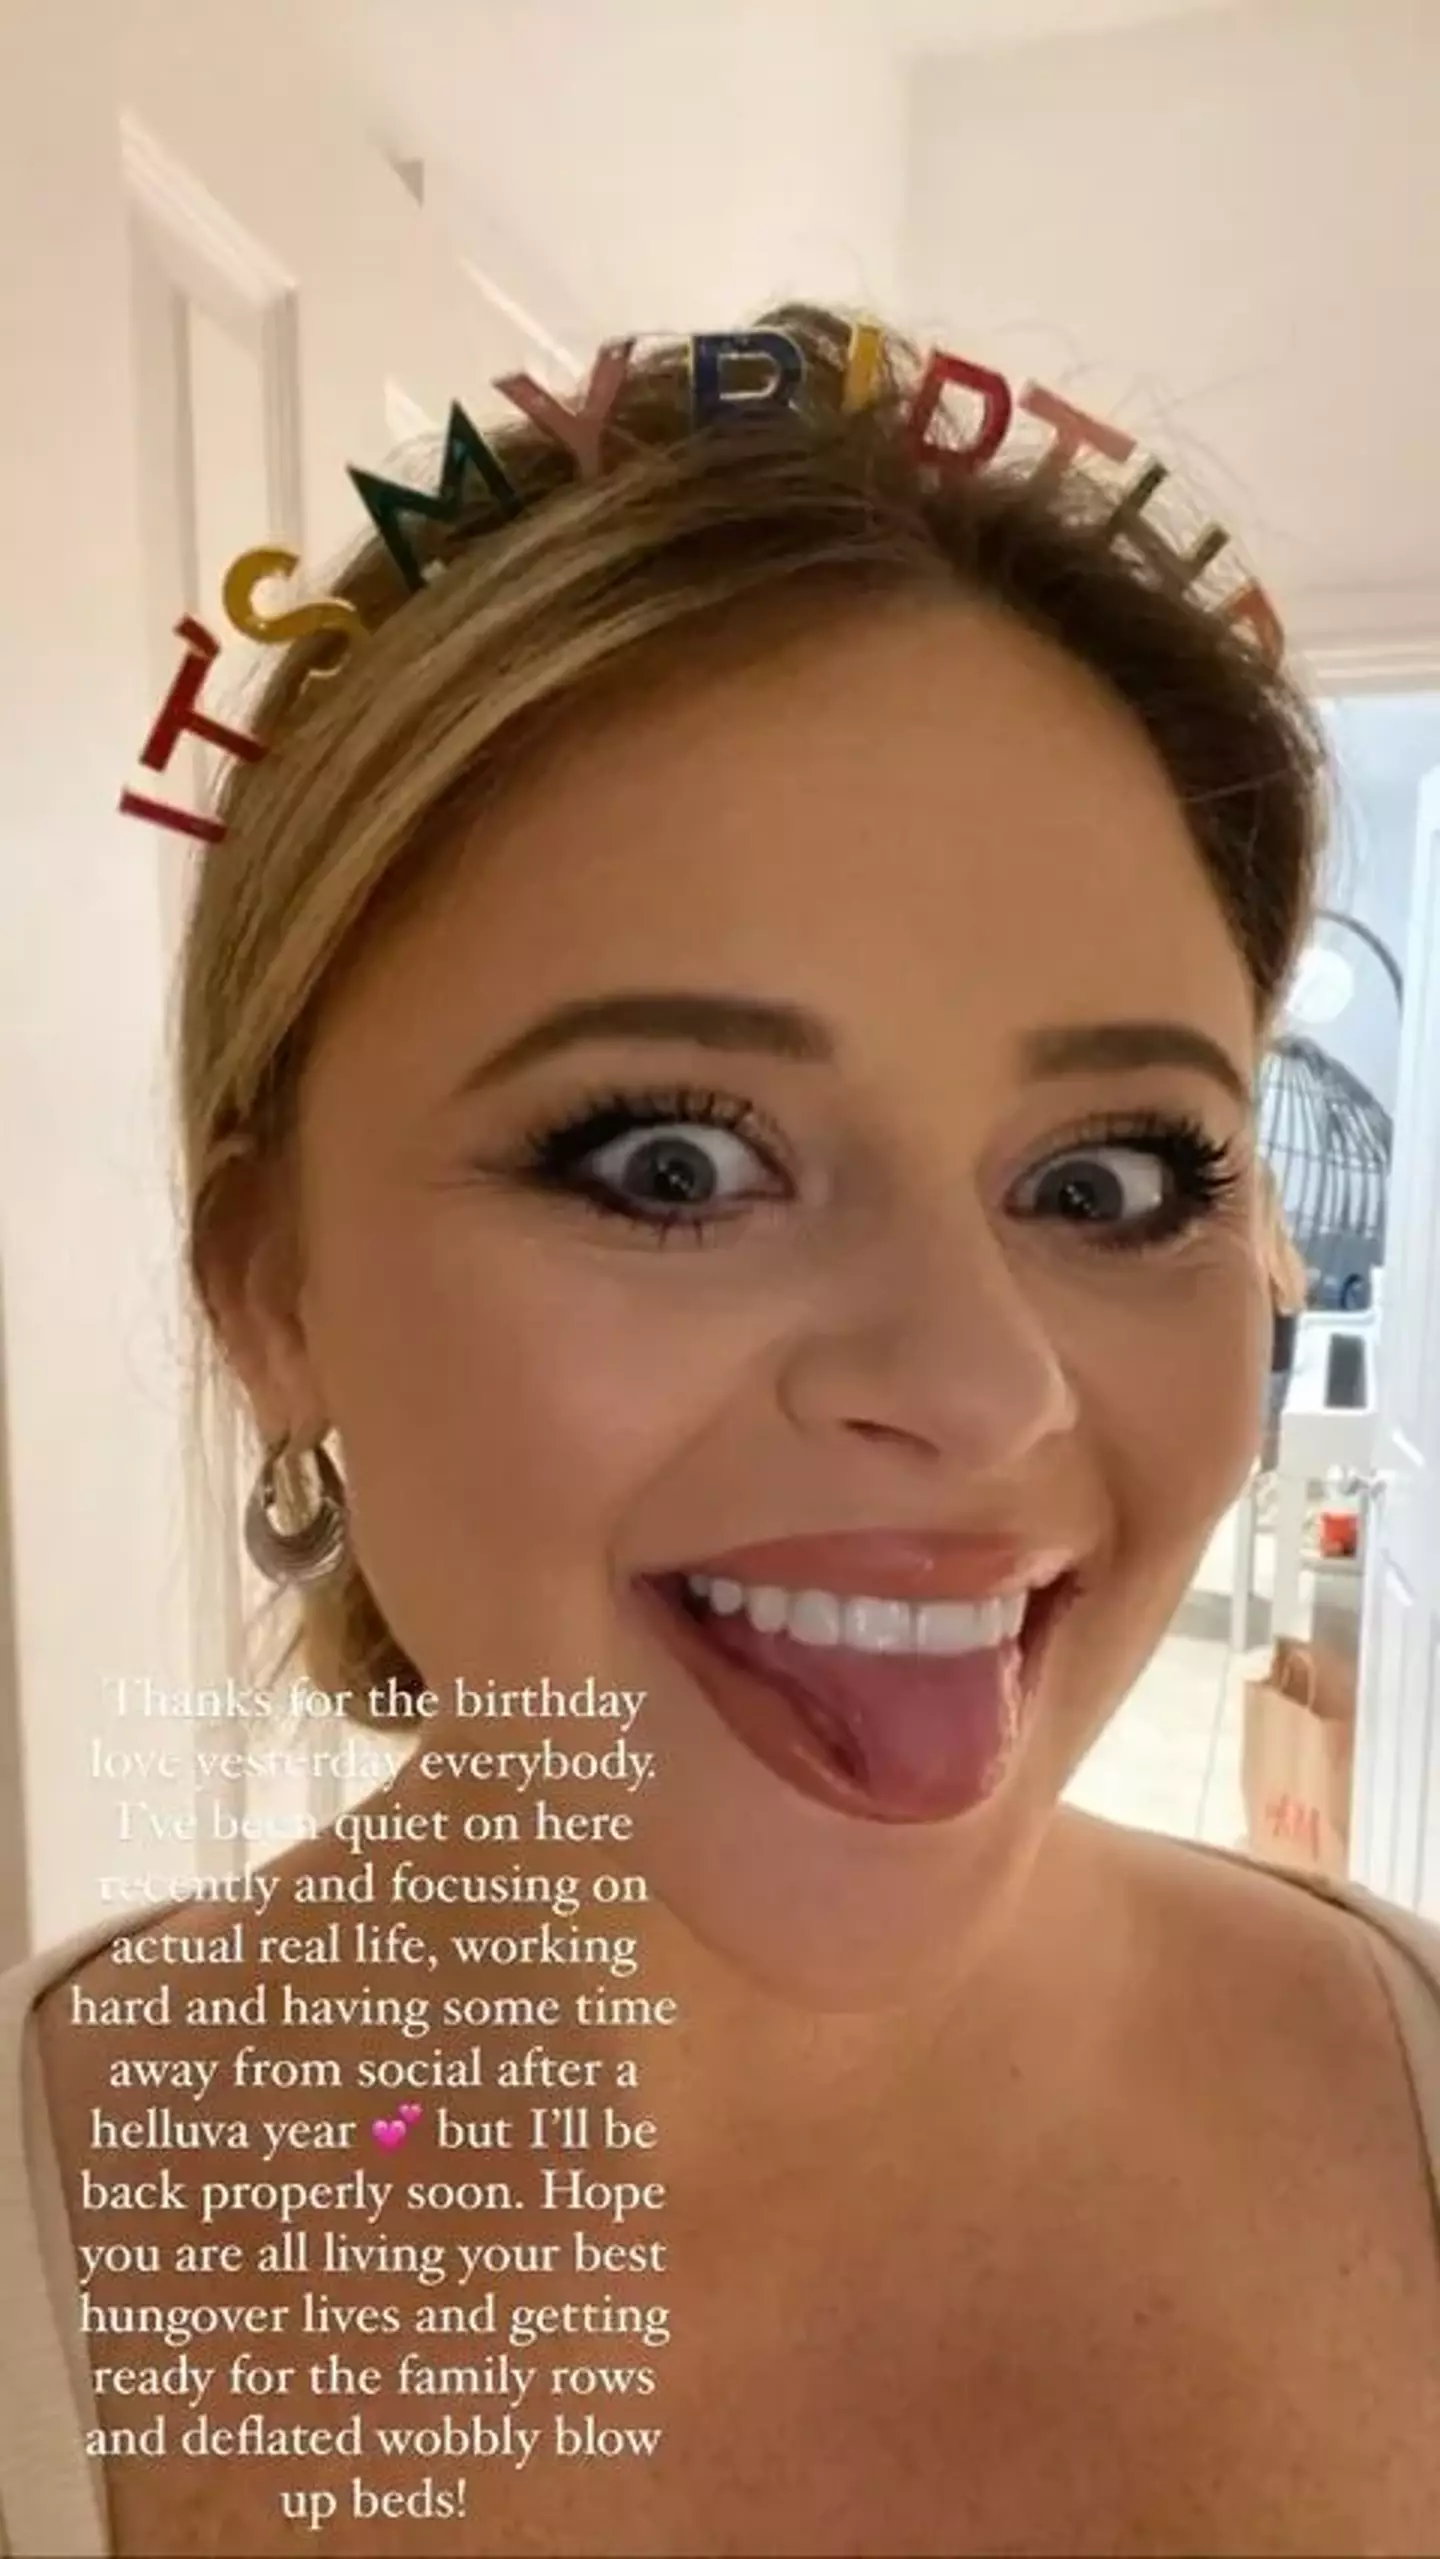 Emily Atack said she was stepping back from social media.